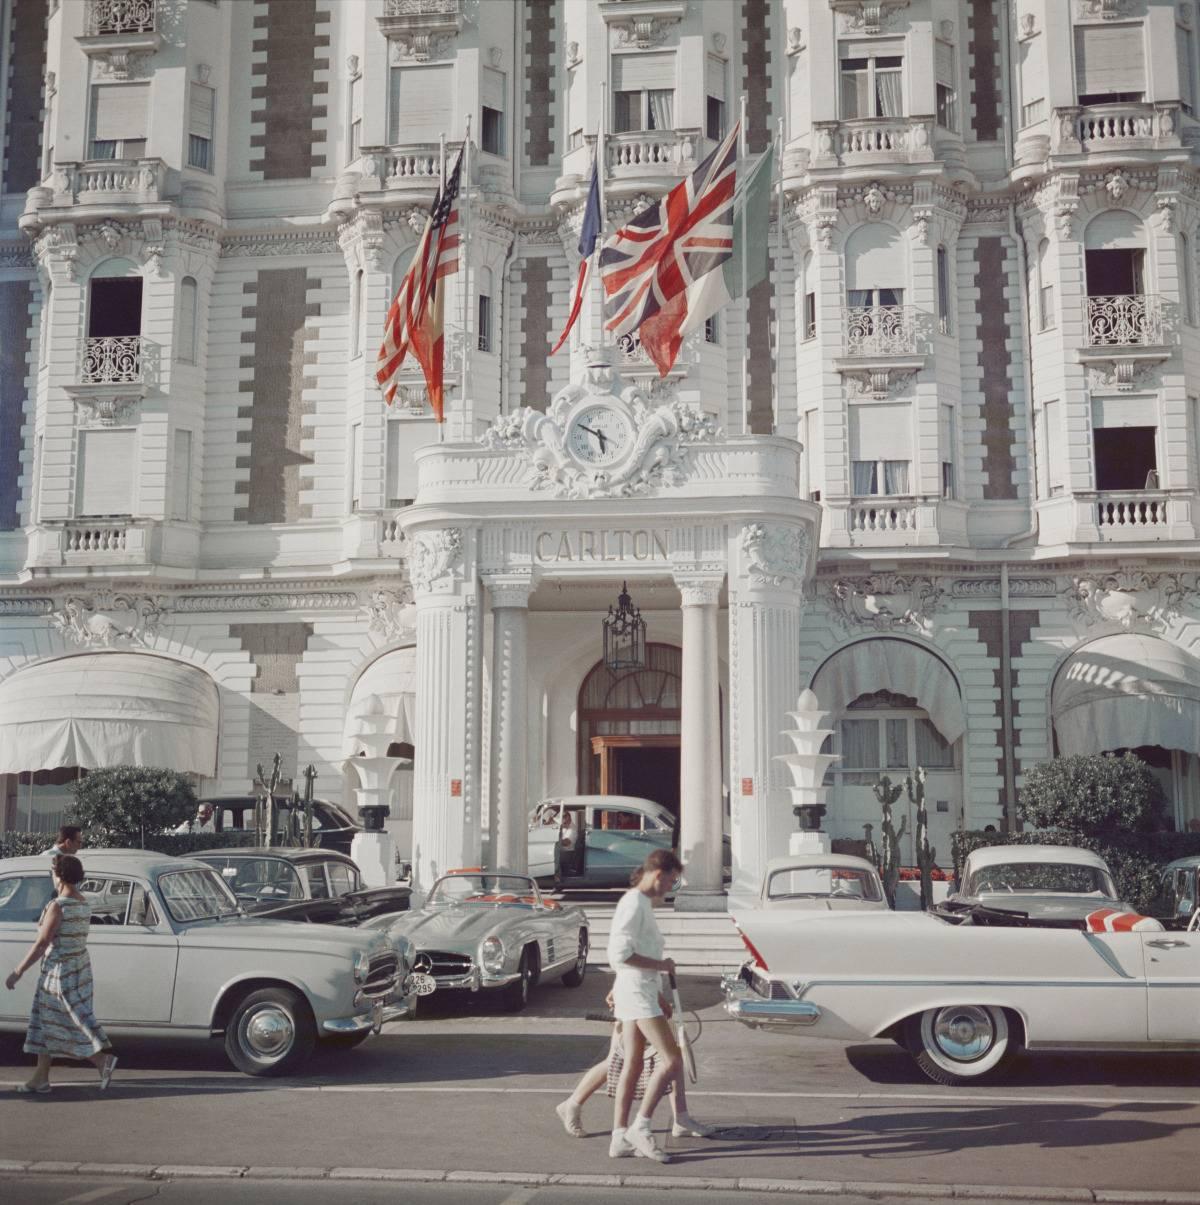 The entrance to the Carlton Hotel, Cannes, France, 1958. 

Estate stamped and hand numbered edition of 150 with certificate of authenticity from the estate. 

Slim Aarons (1916-2006) worked mainly for society publications photographing attractive